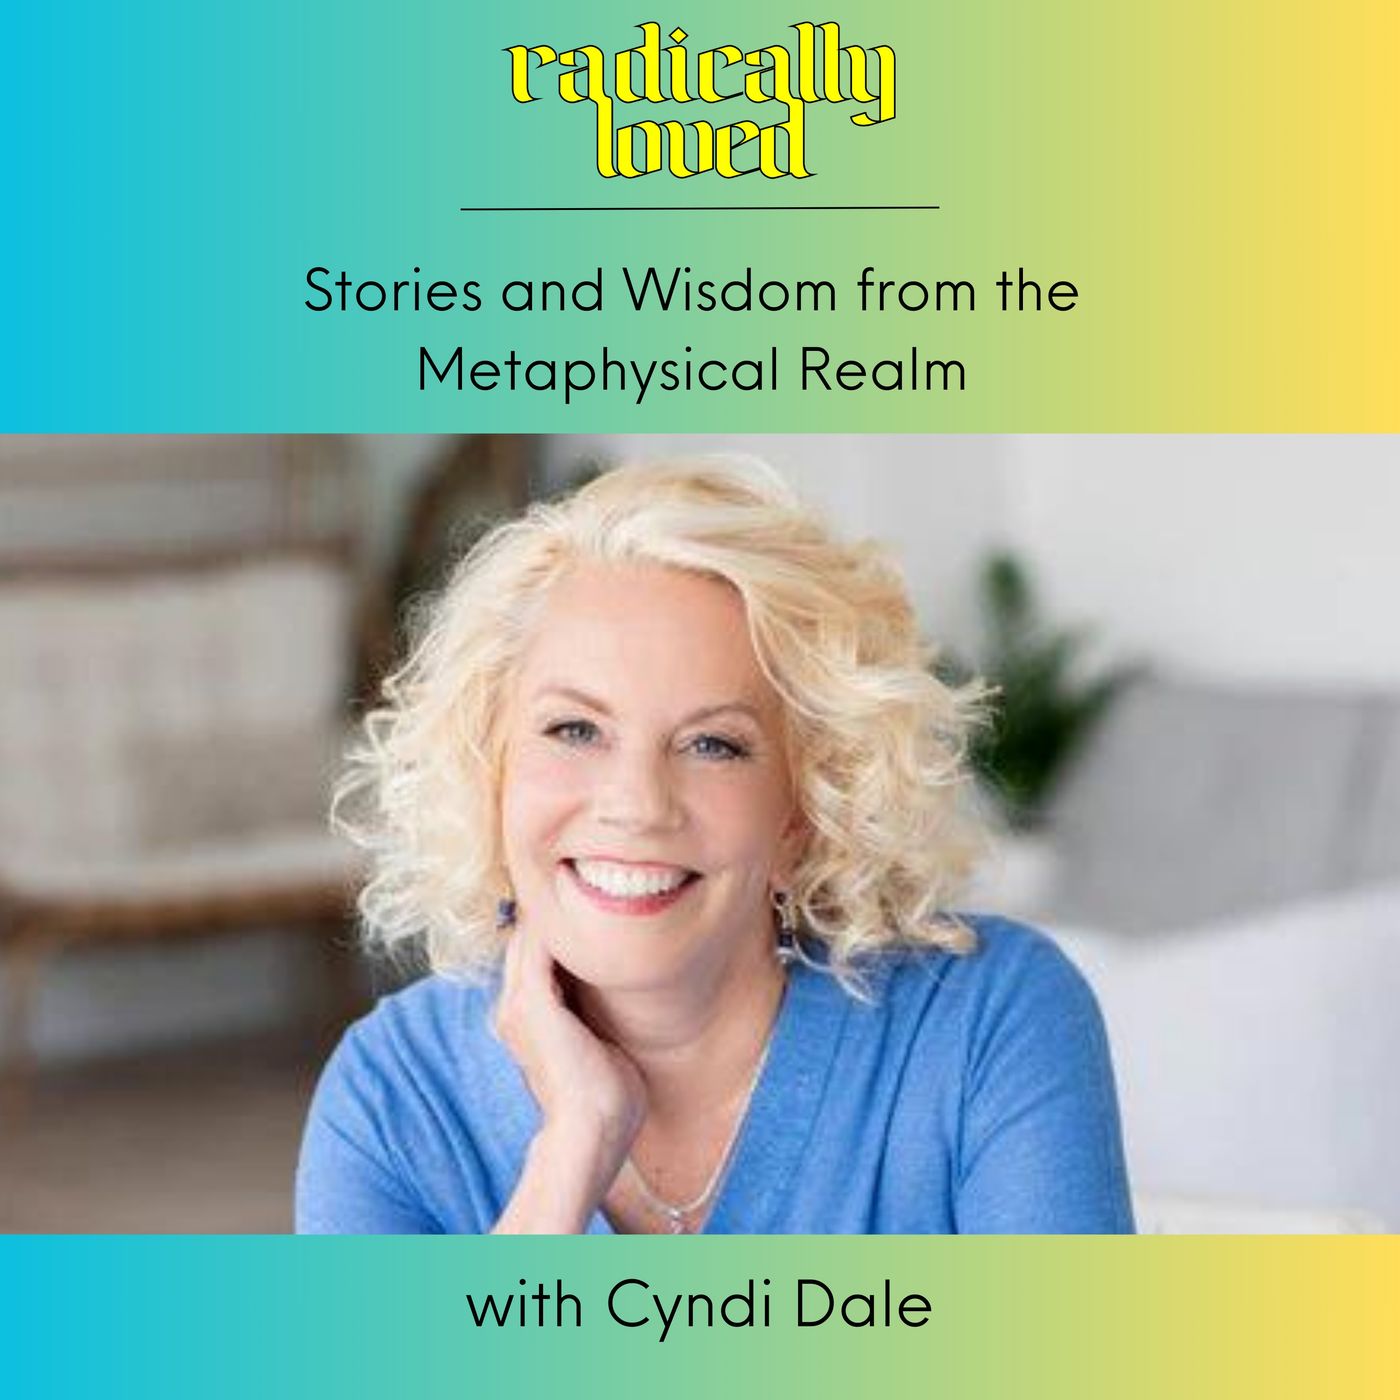 Episode 522. Stories and Wisdom from the Metaphysical Realm with Cyndi Dale